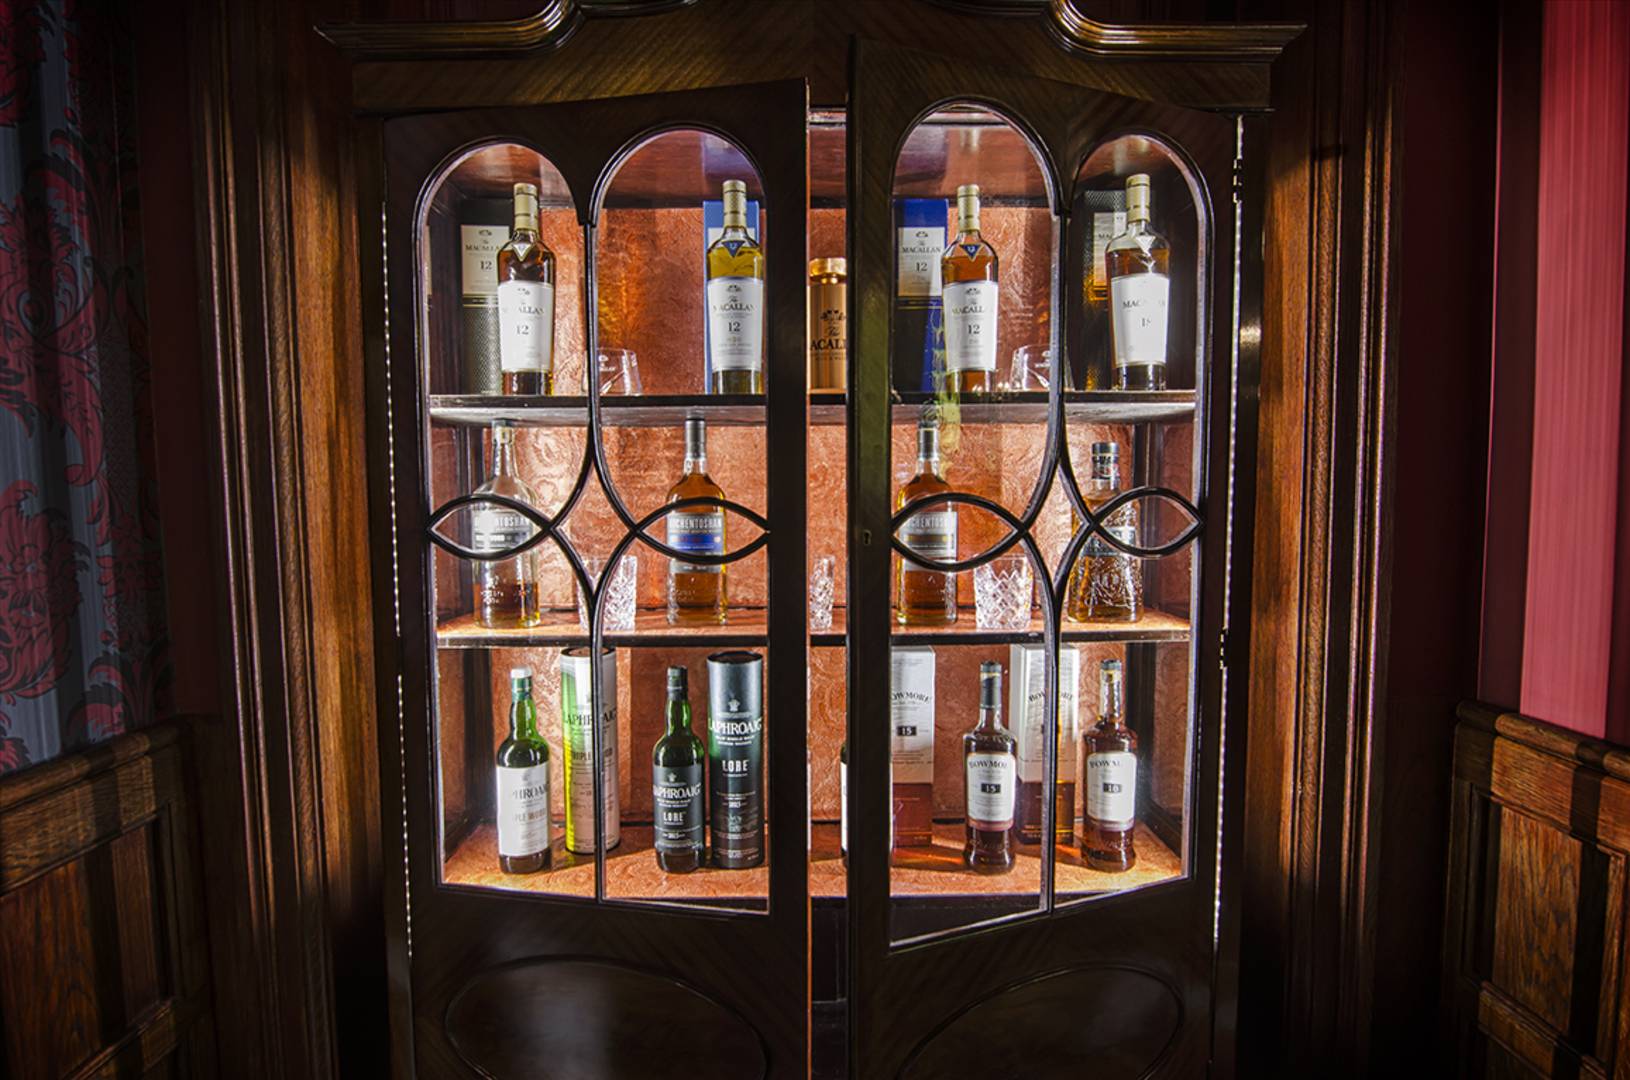 The bar offers a wide selection of spirits, wines, beer and cocktails.